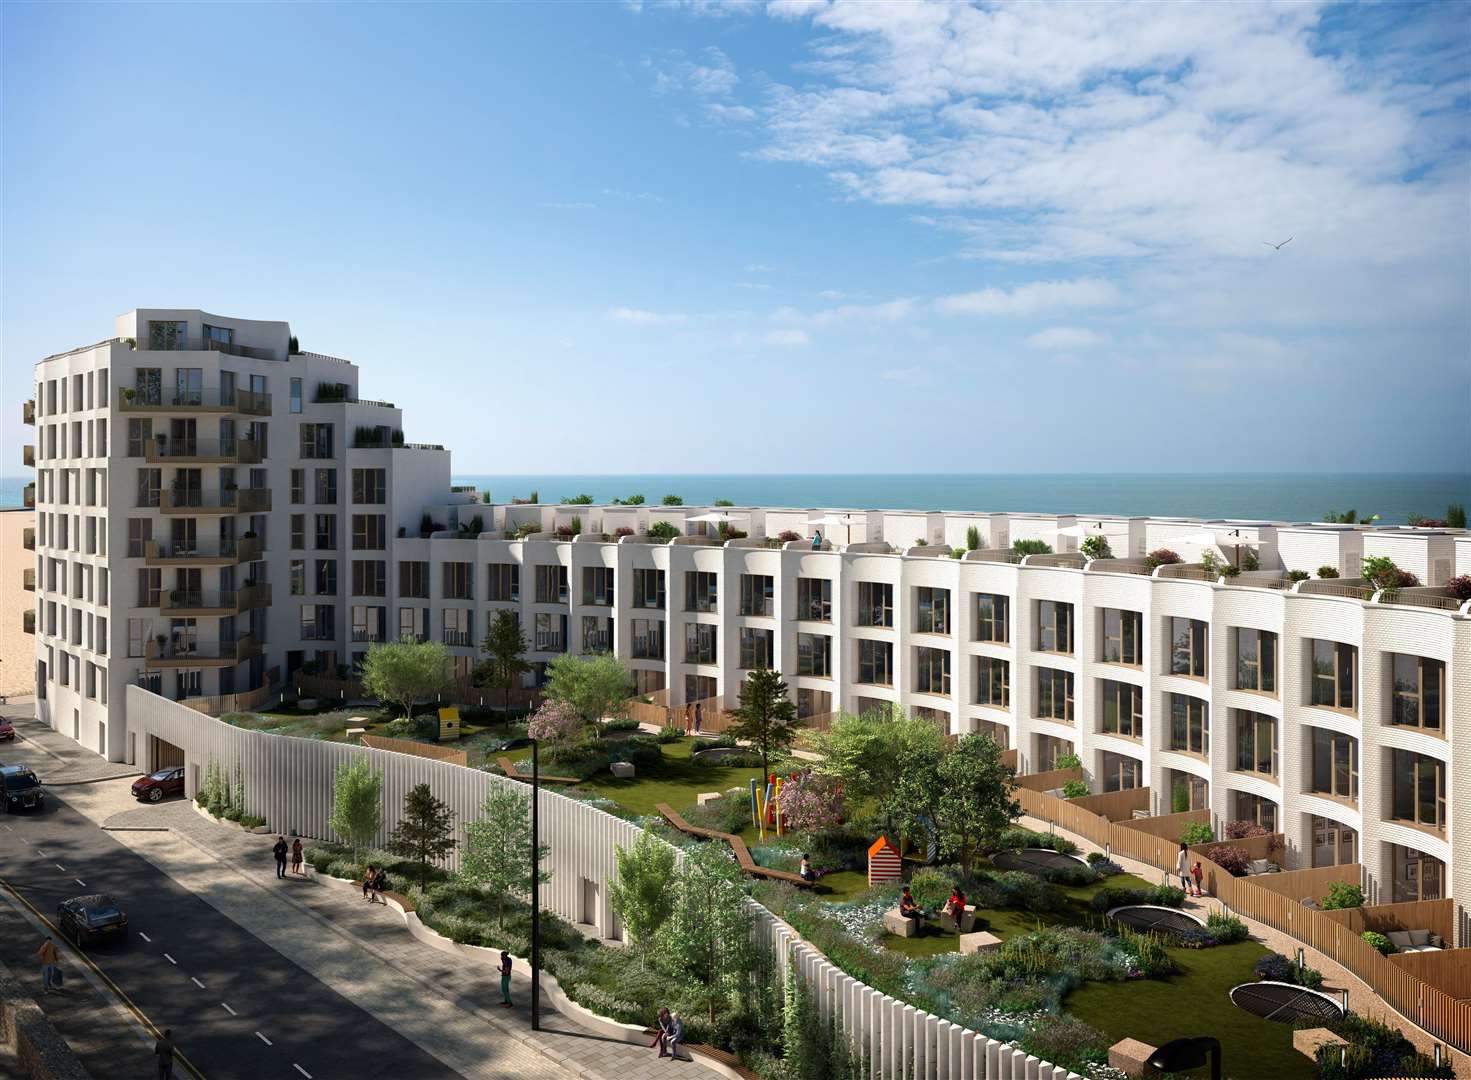 The Shoreline Crescent development on Folkestone seafront includes 20 townhouses – those currently on sale are valued at around £2m. Picture: Folkestone Harbour Seafront Development Company